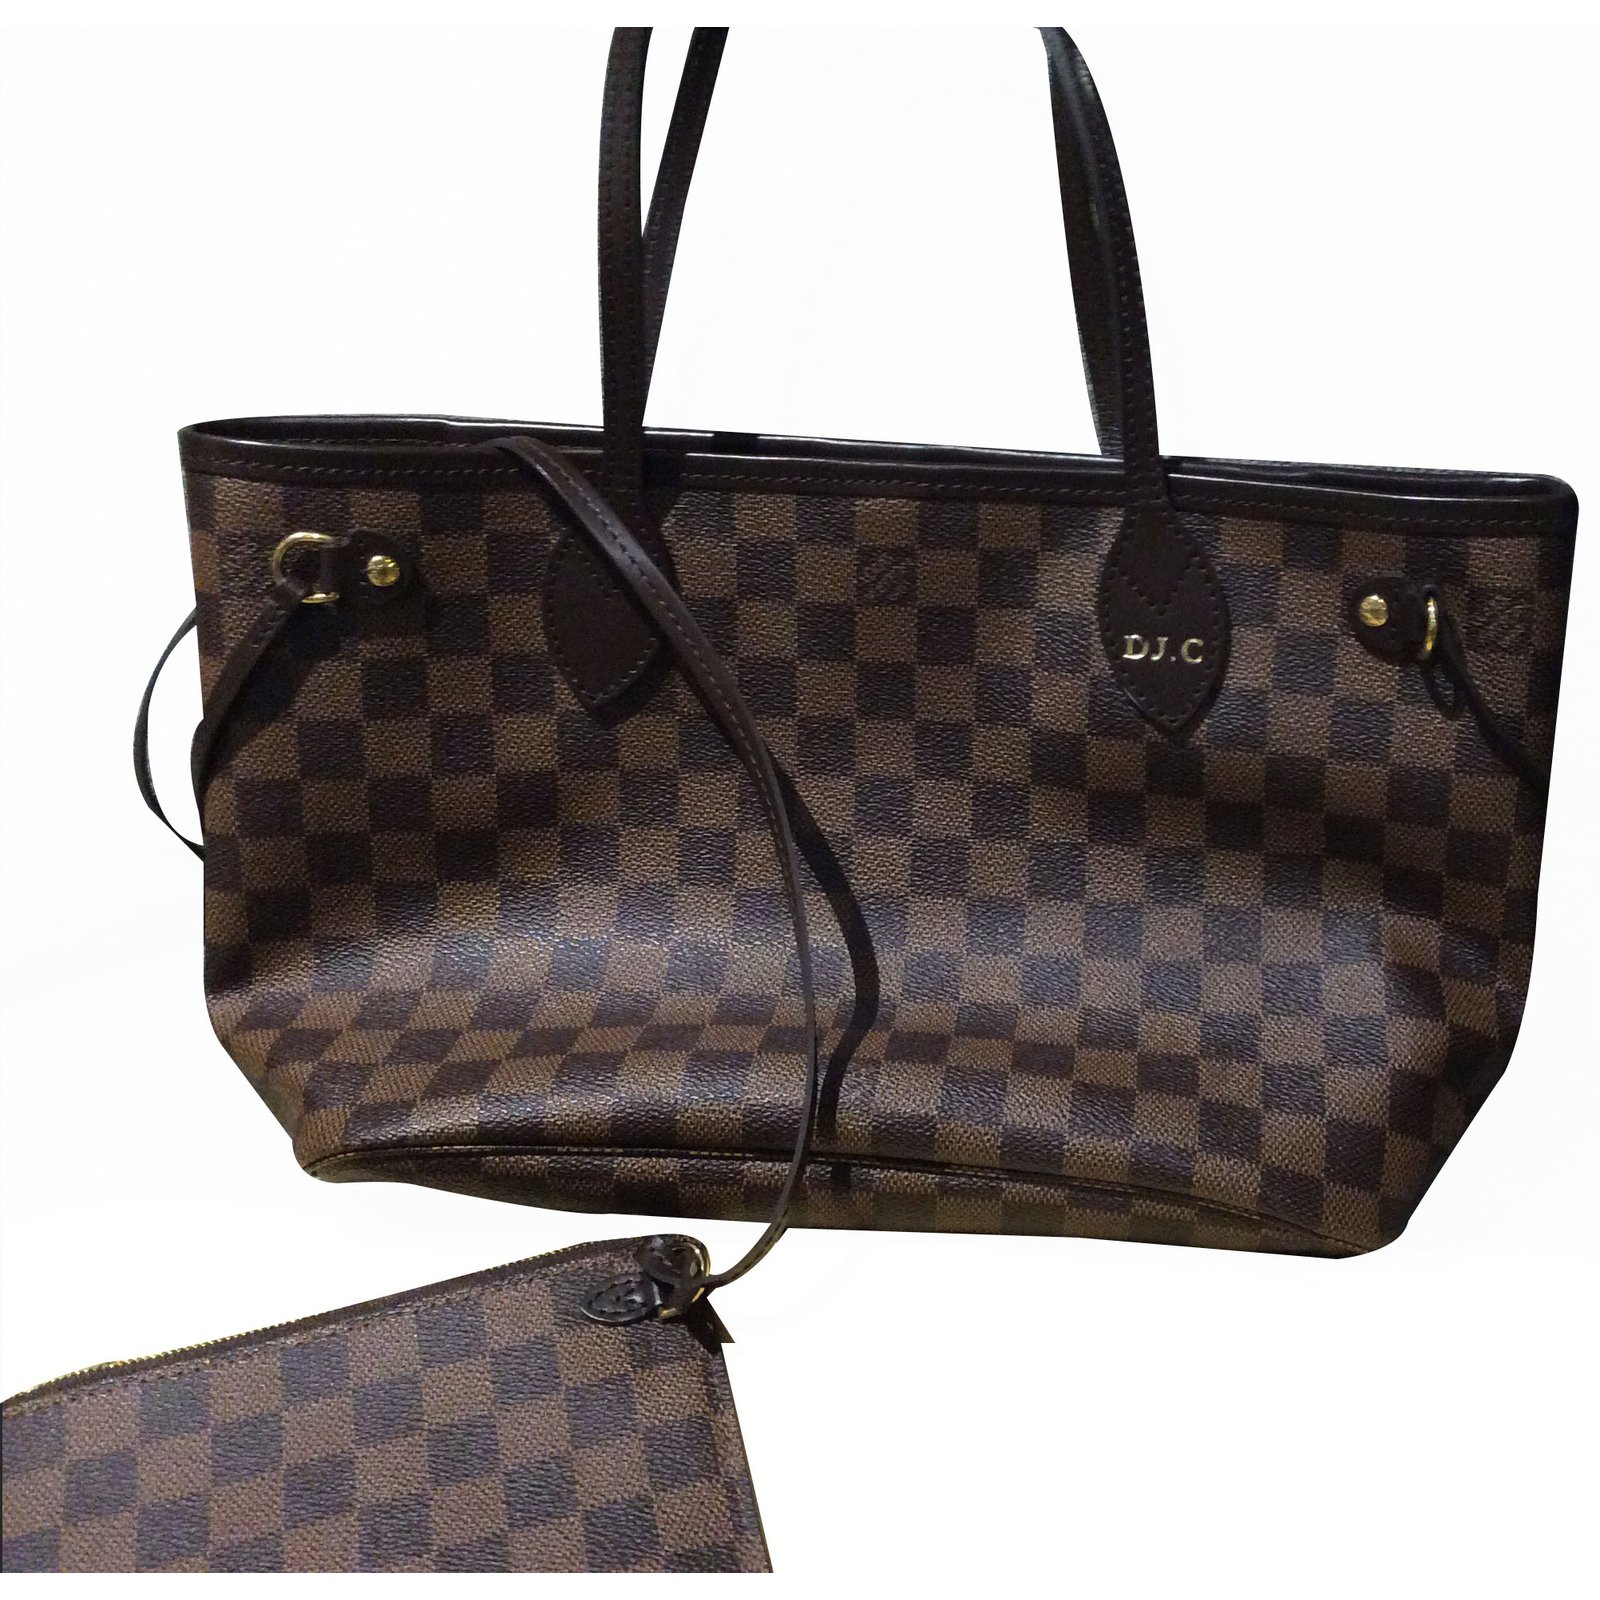 Sac Louis Vuitton Neverfull D | Confederated Tribes of the Umatilla Indian Reservation